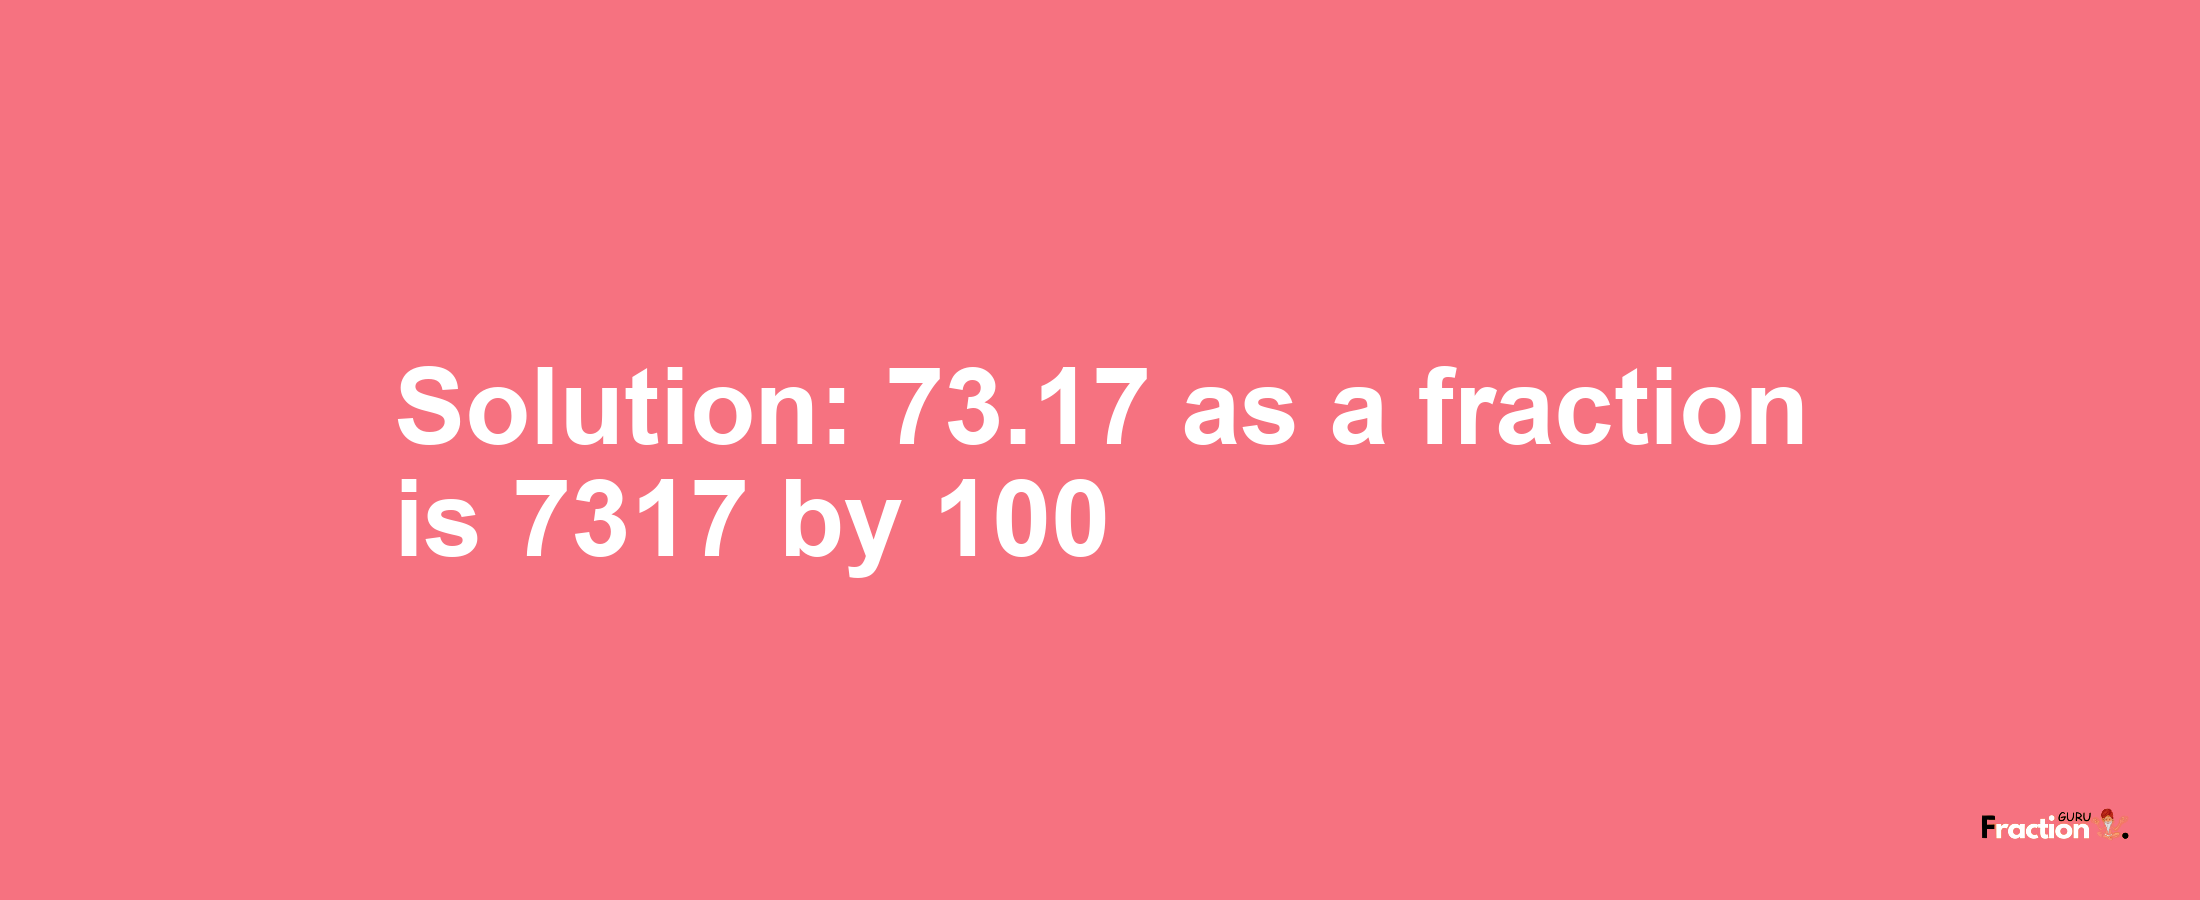 Solution:73.17 as a fraction is 7317/100